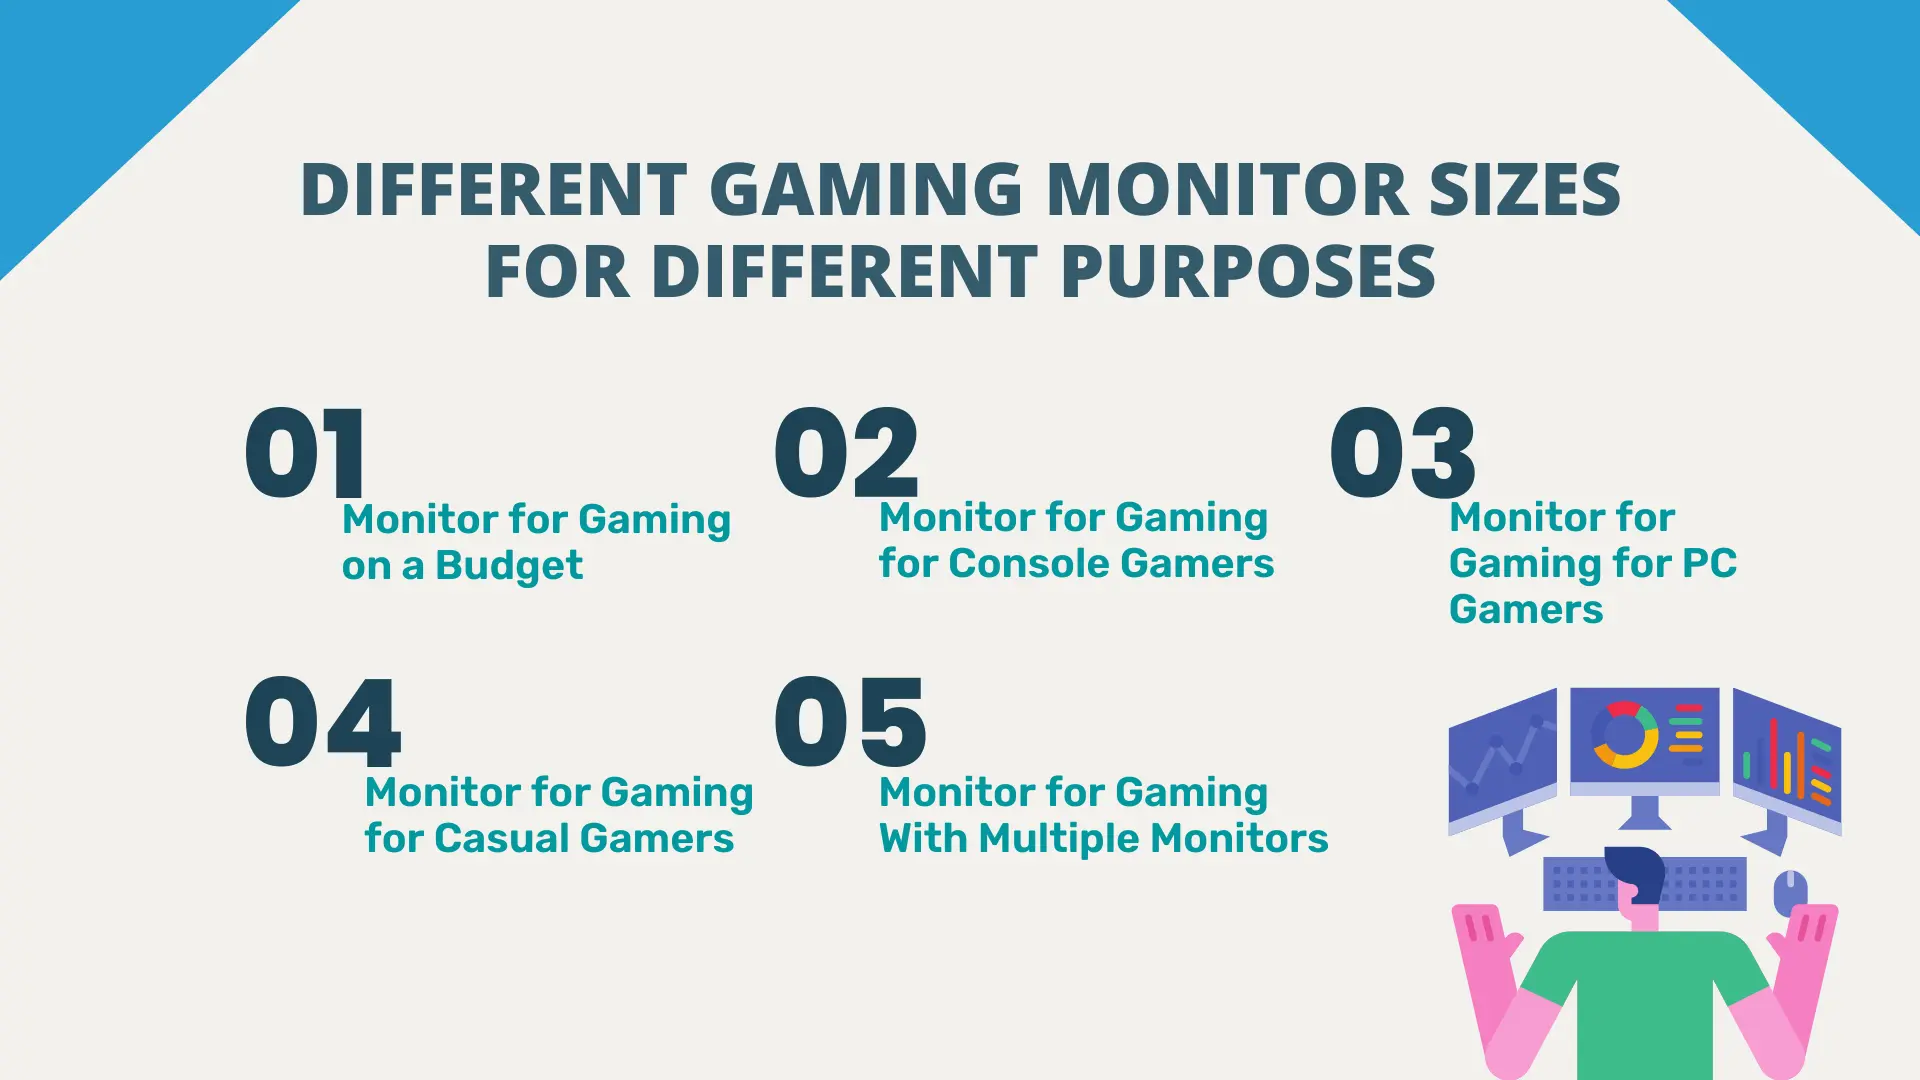 Different Gaming Monitor Sizes for Different Purposes